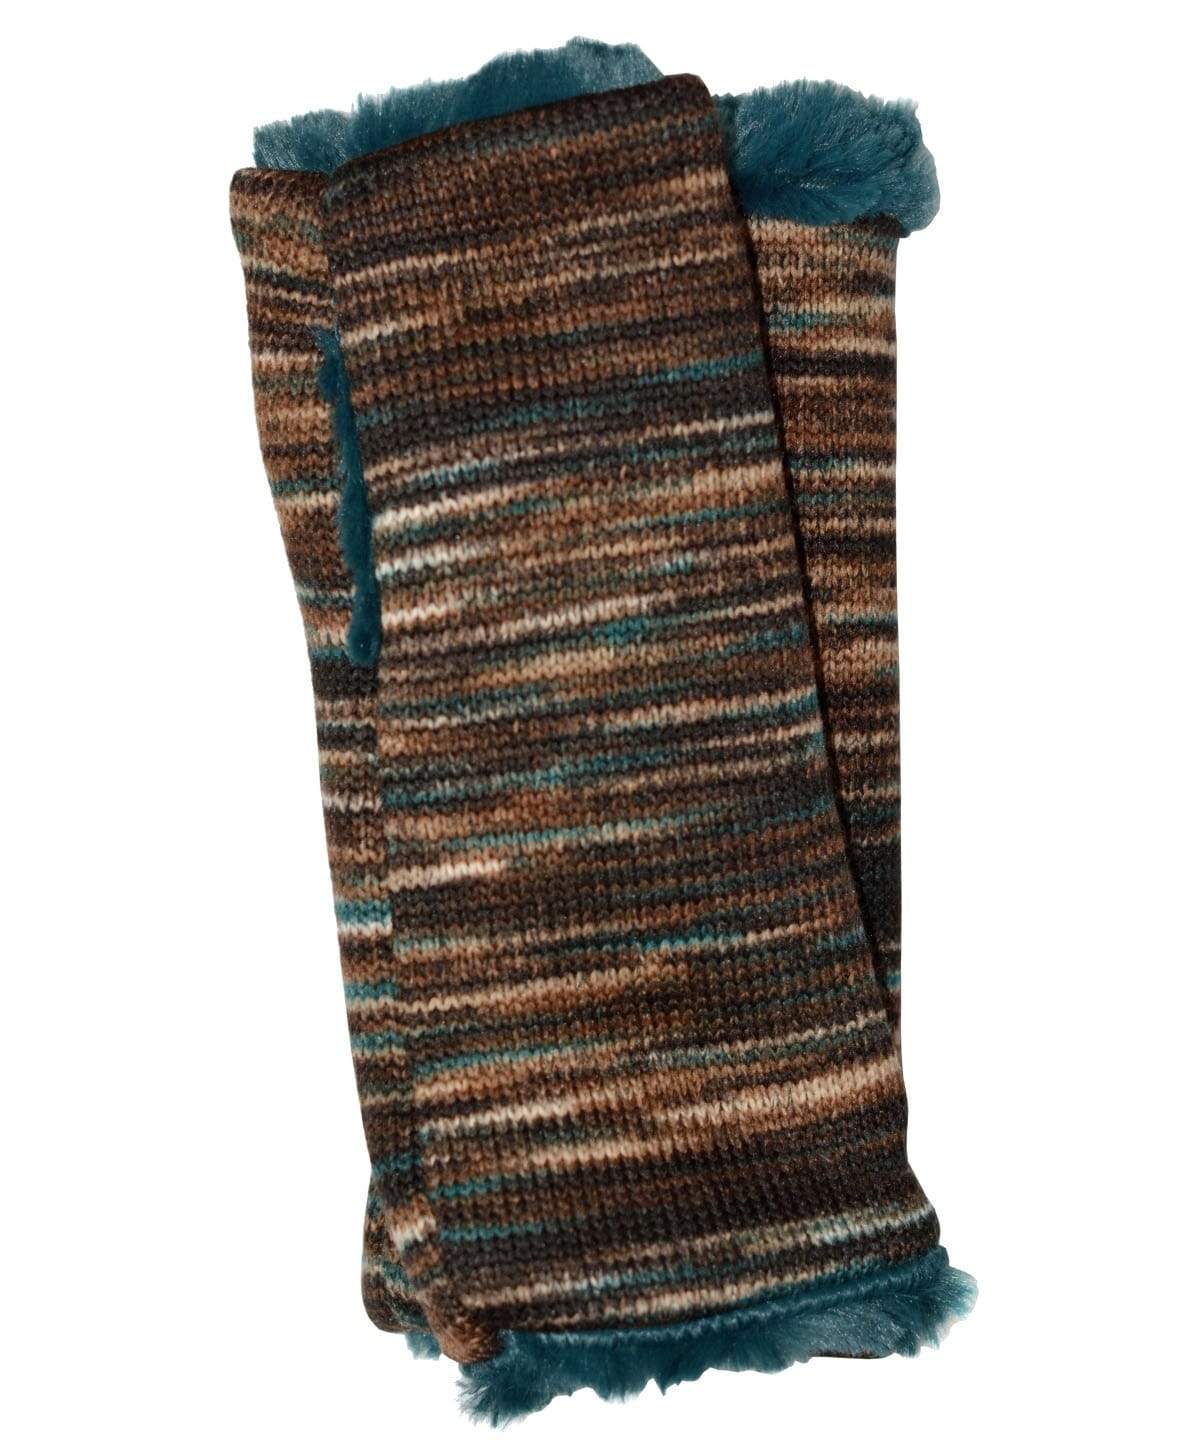 Reversible Fingerless Gloves | Sweet Stripes in English Toffee with Peacock Pond Faux Fur | Pandemonium Millinery